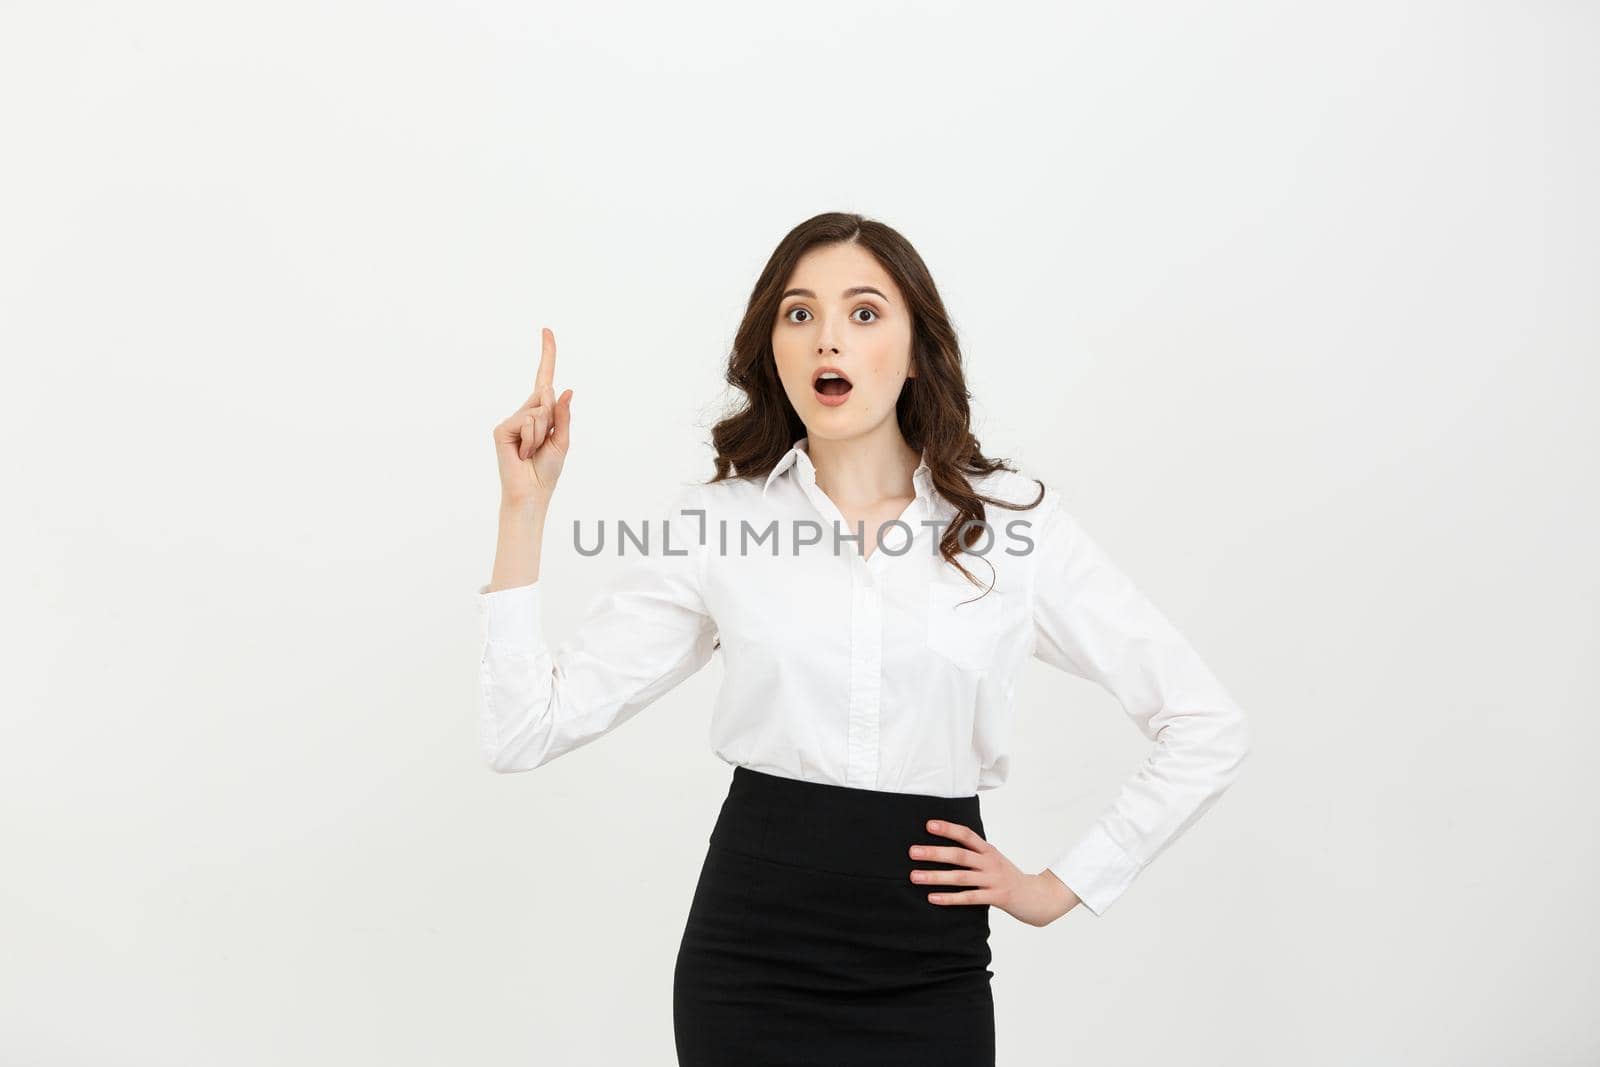 Business Concept: Attractive young Caucasian girl open her mouth and pointing her index finger to the top. She looks enthusiastic, isolated on white background.